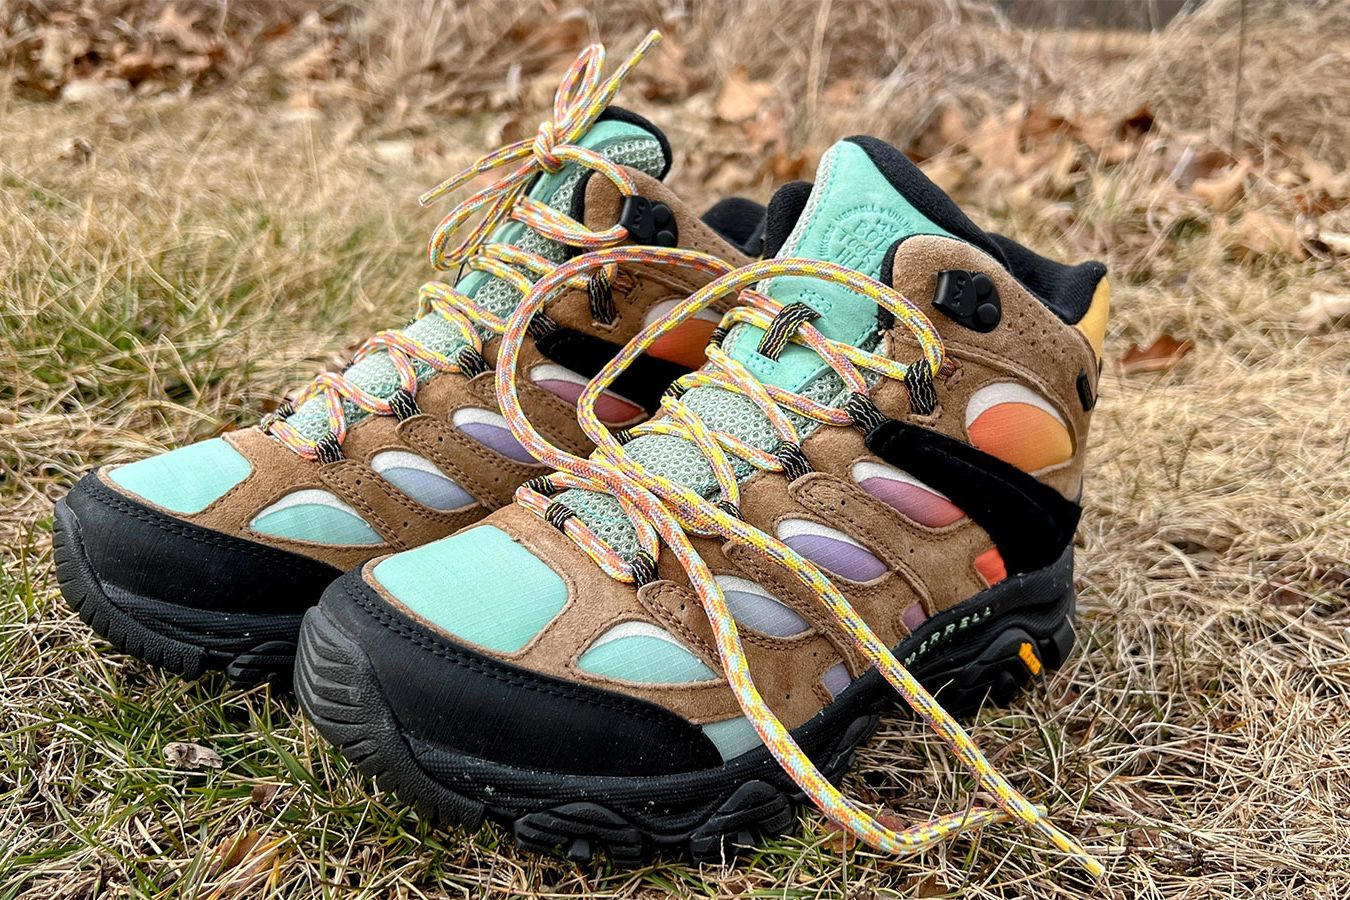 Merrell Unlikely Hikers collab on the new Moab 3s | CNN Underscored